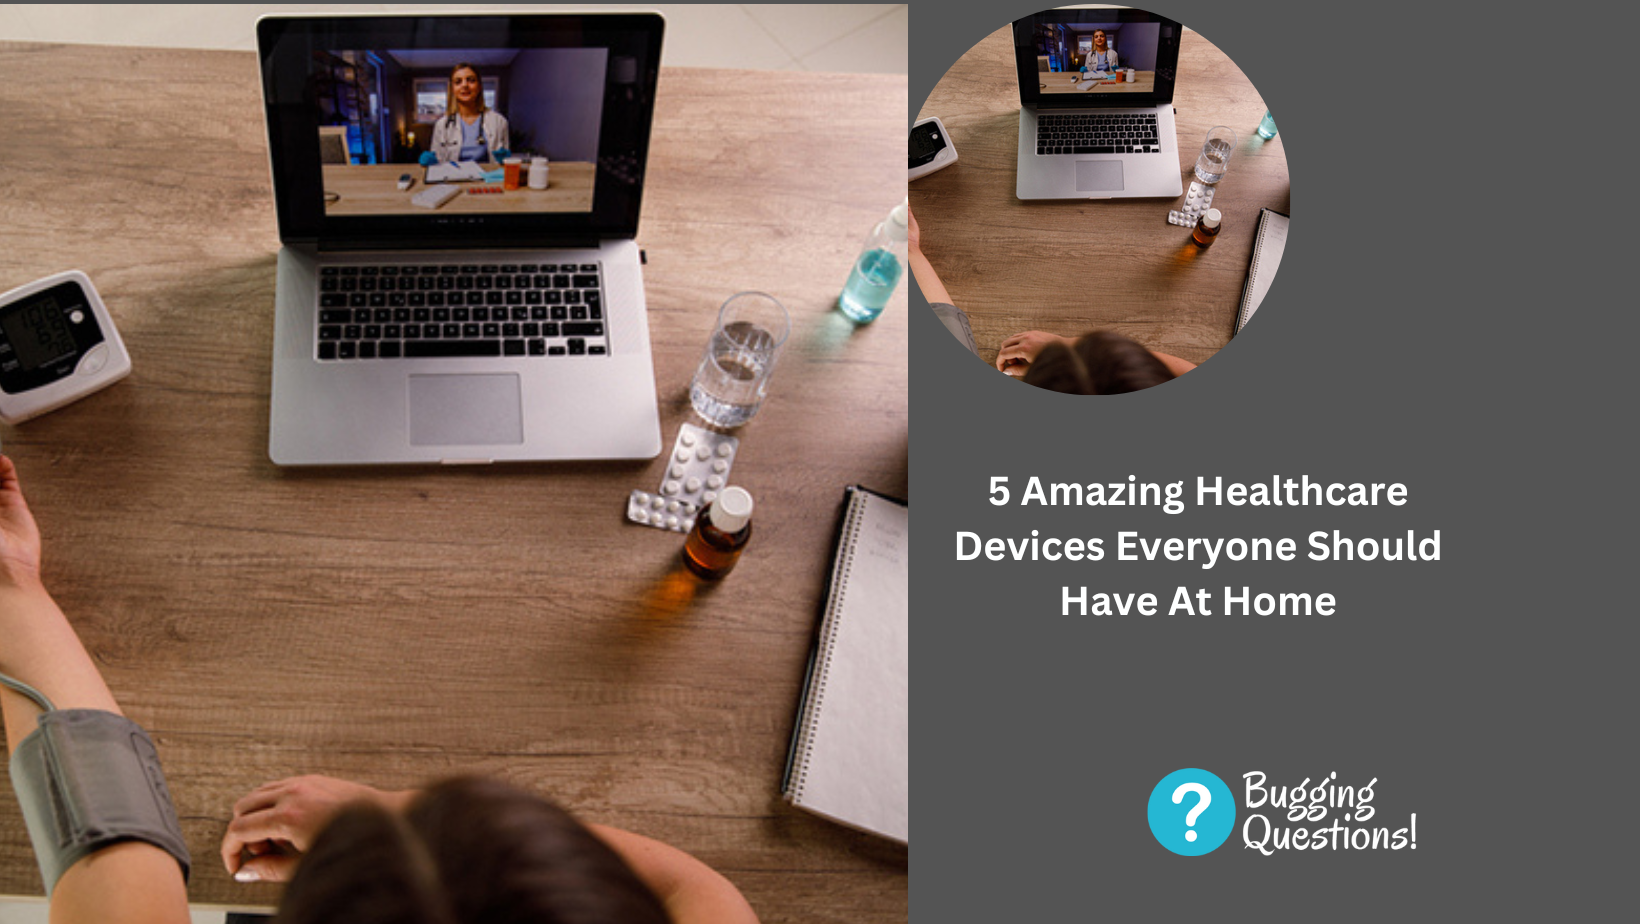 5 Amazing Healthcare Devices Everyone Should Have At Home